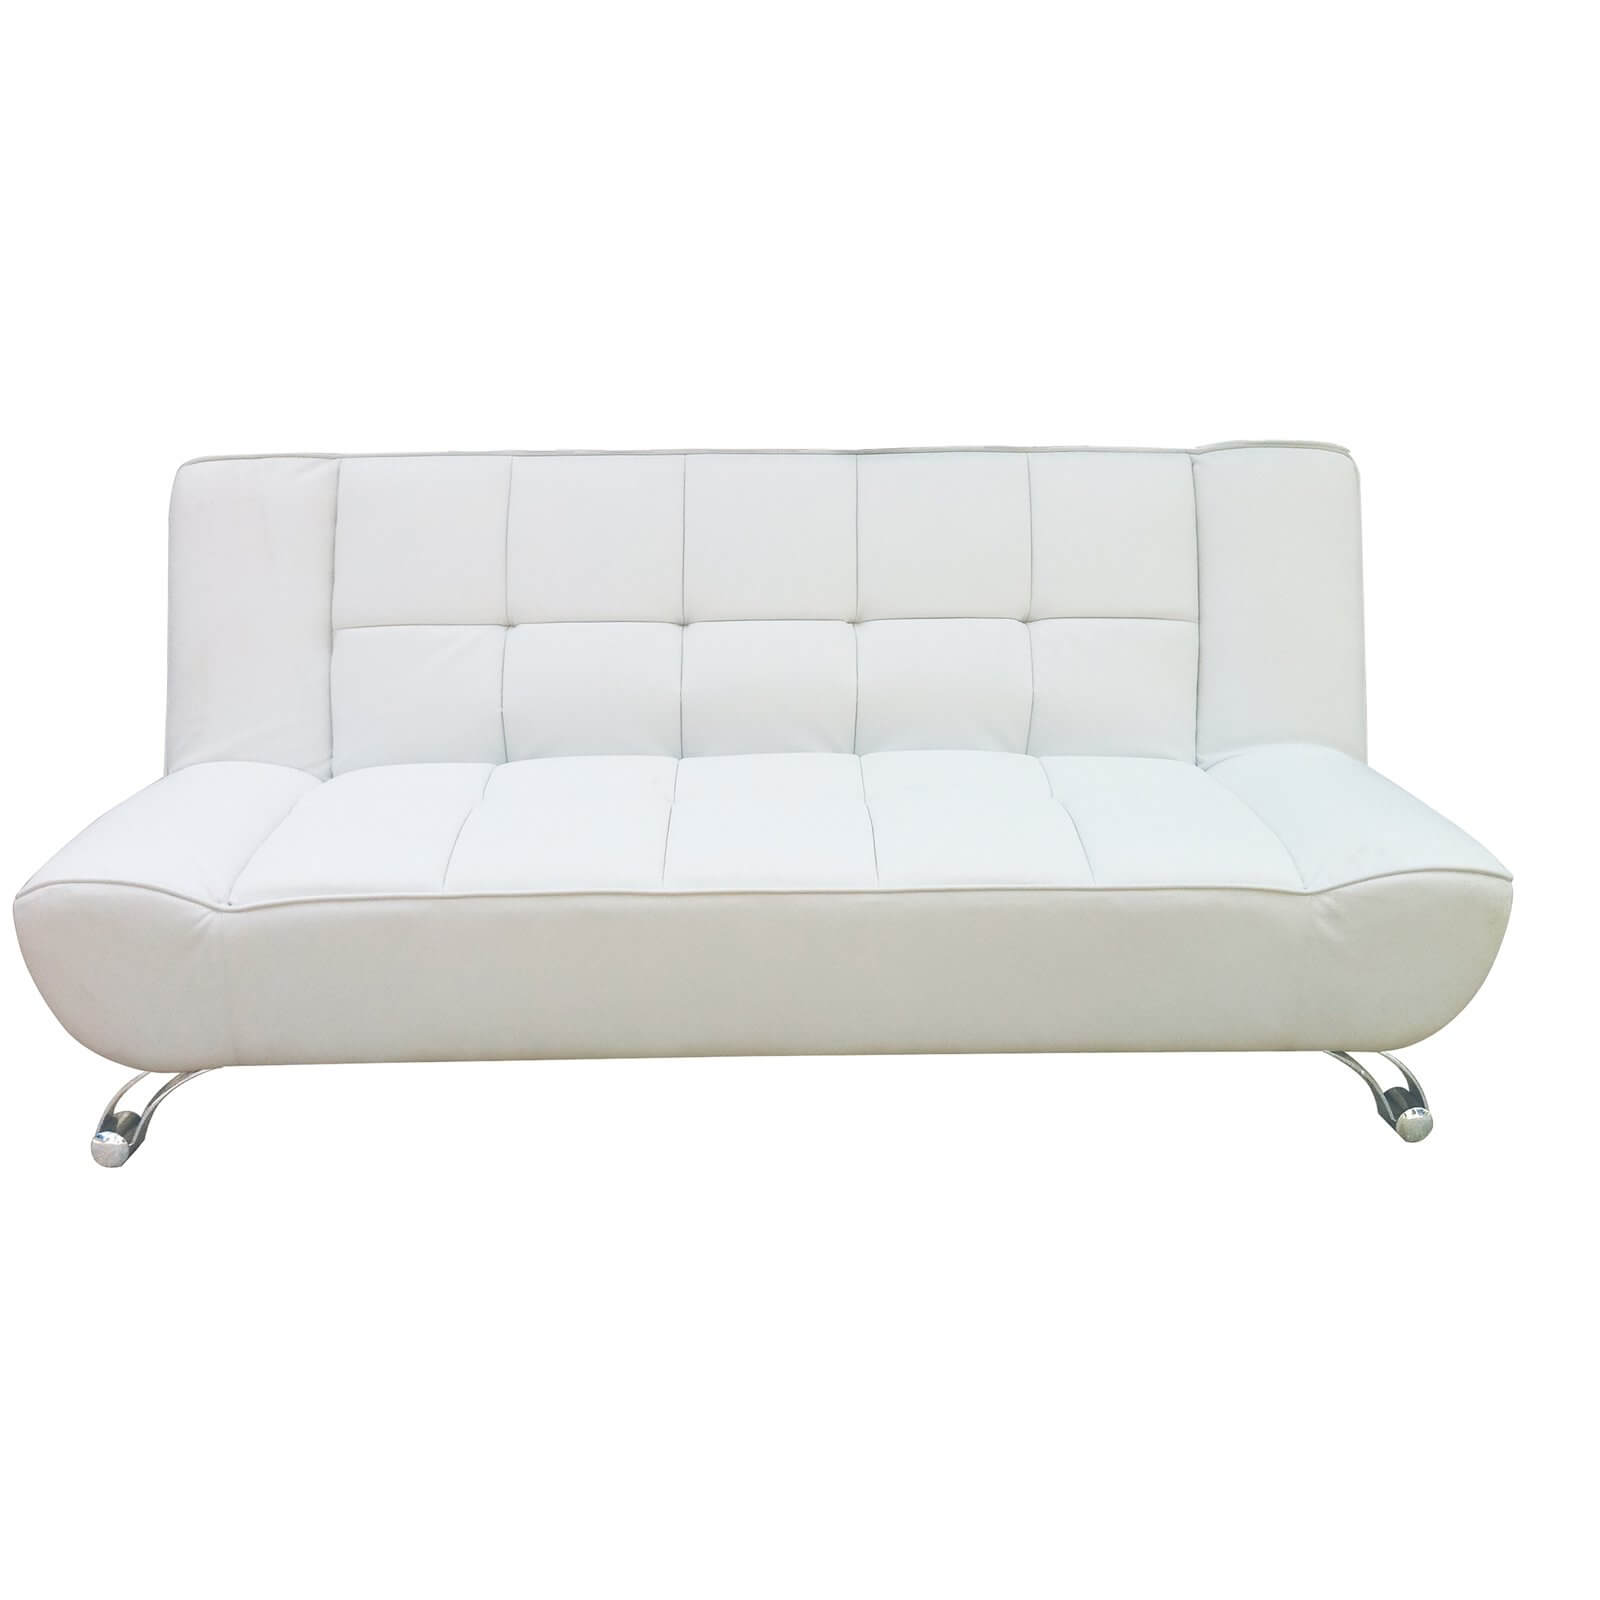 Vogue Sofa Bed - White - Faux Leather